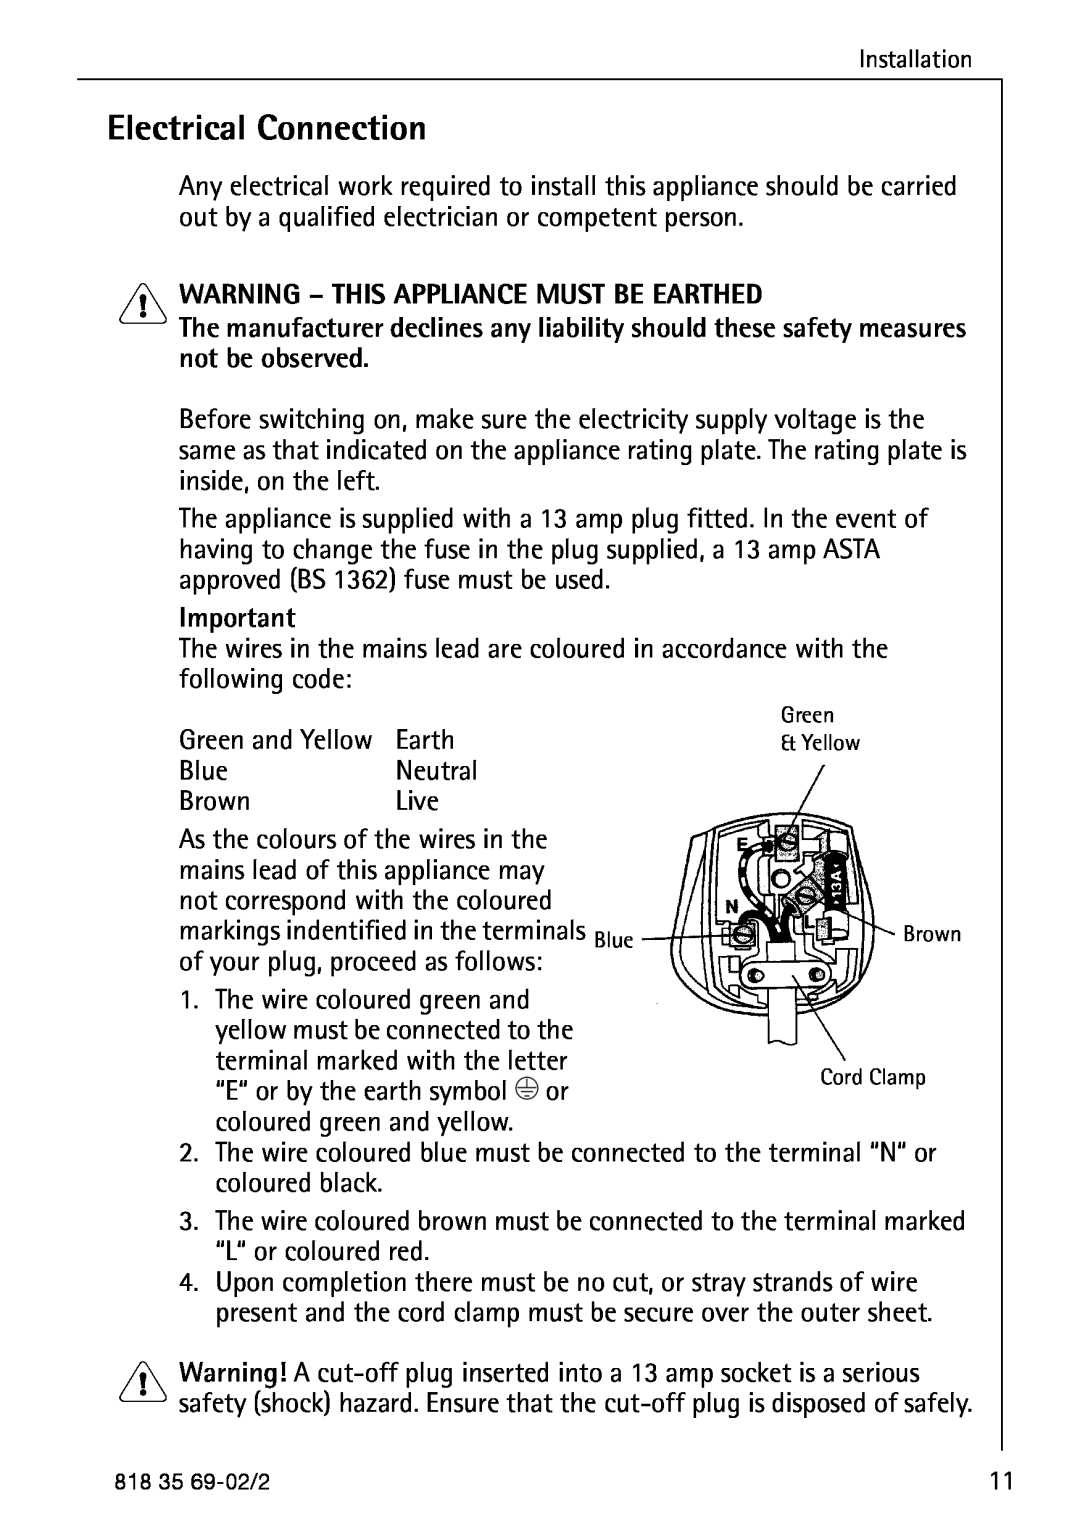 AEG S75578KG3 manual Electrical Connection, Warning - This Appliance Must Be Earthed 